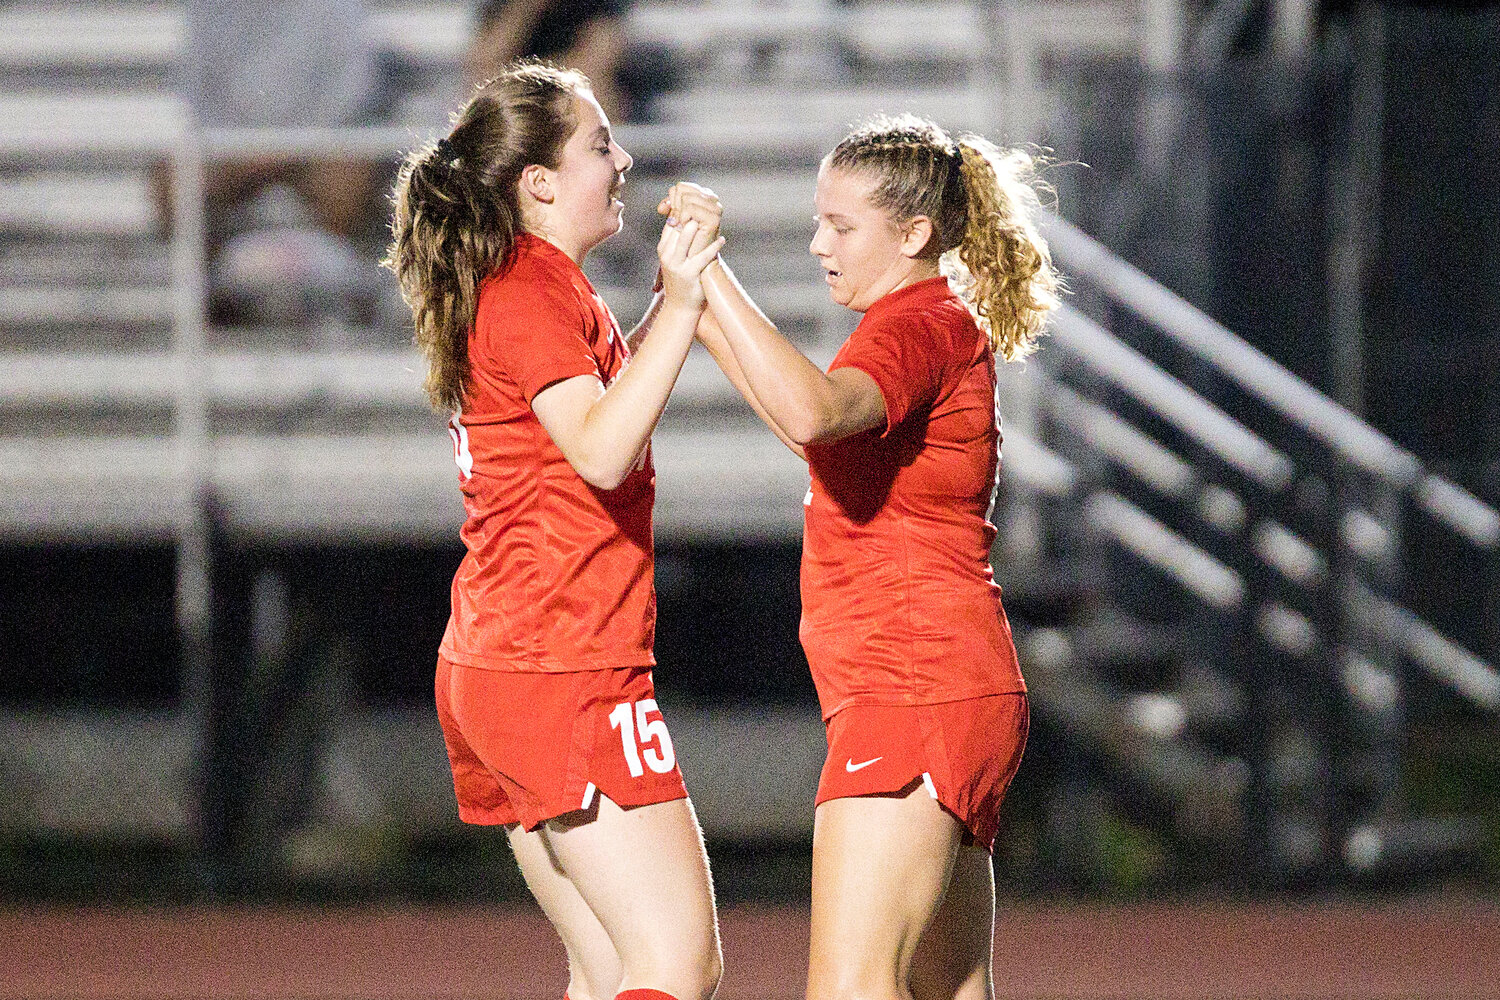 Kaelyn Mahoney (left) and Mollyana McGuire celebrate after a shot from McGuire finds the back of the net in the first half of Tuesday’s game against North Smithfield.